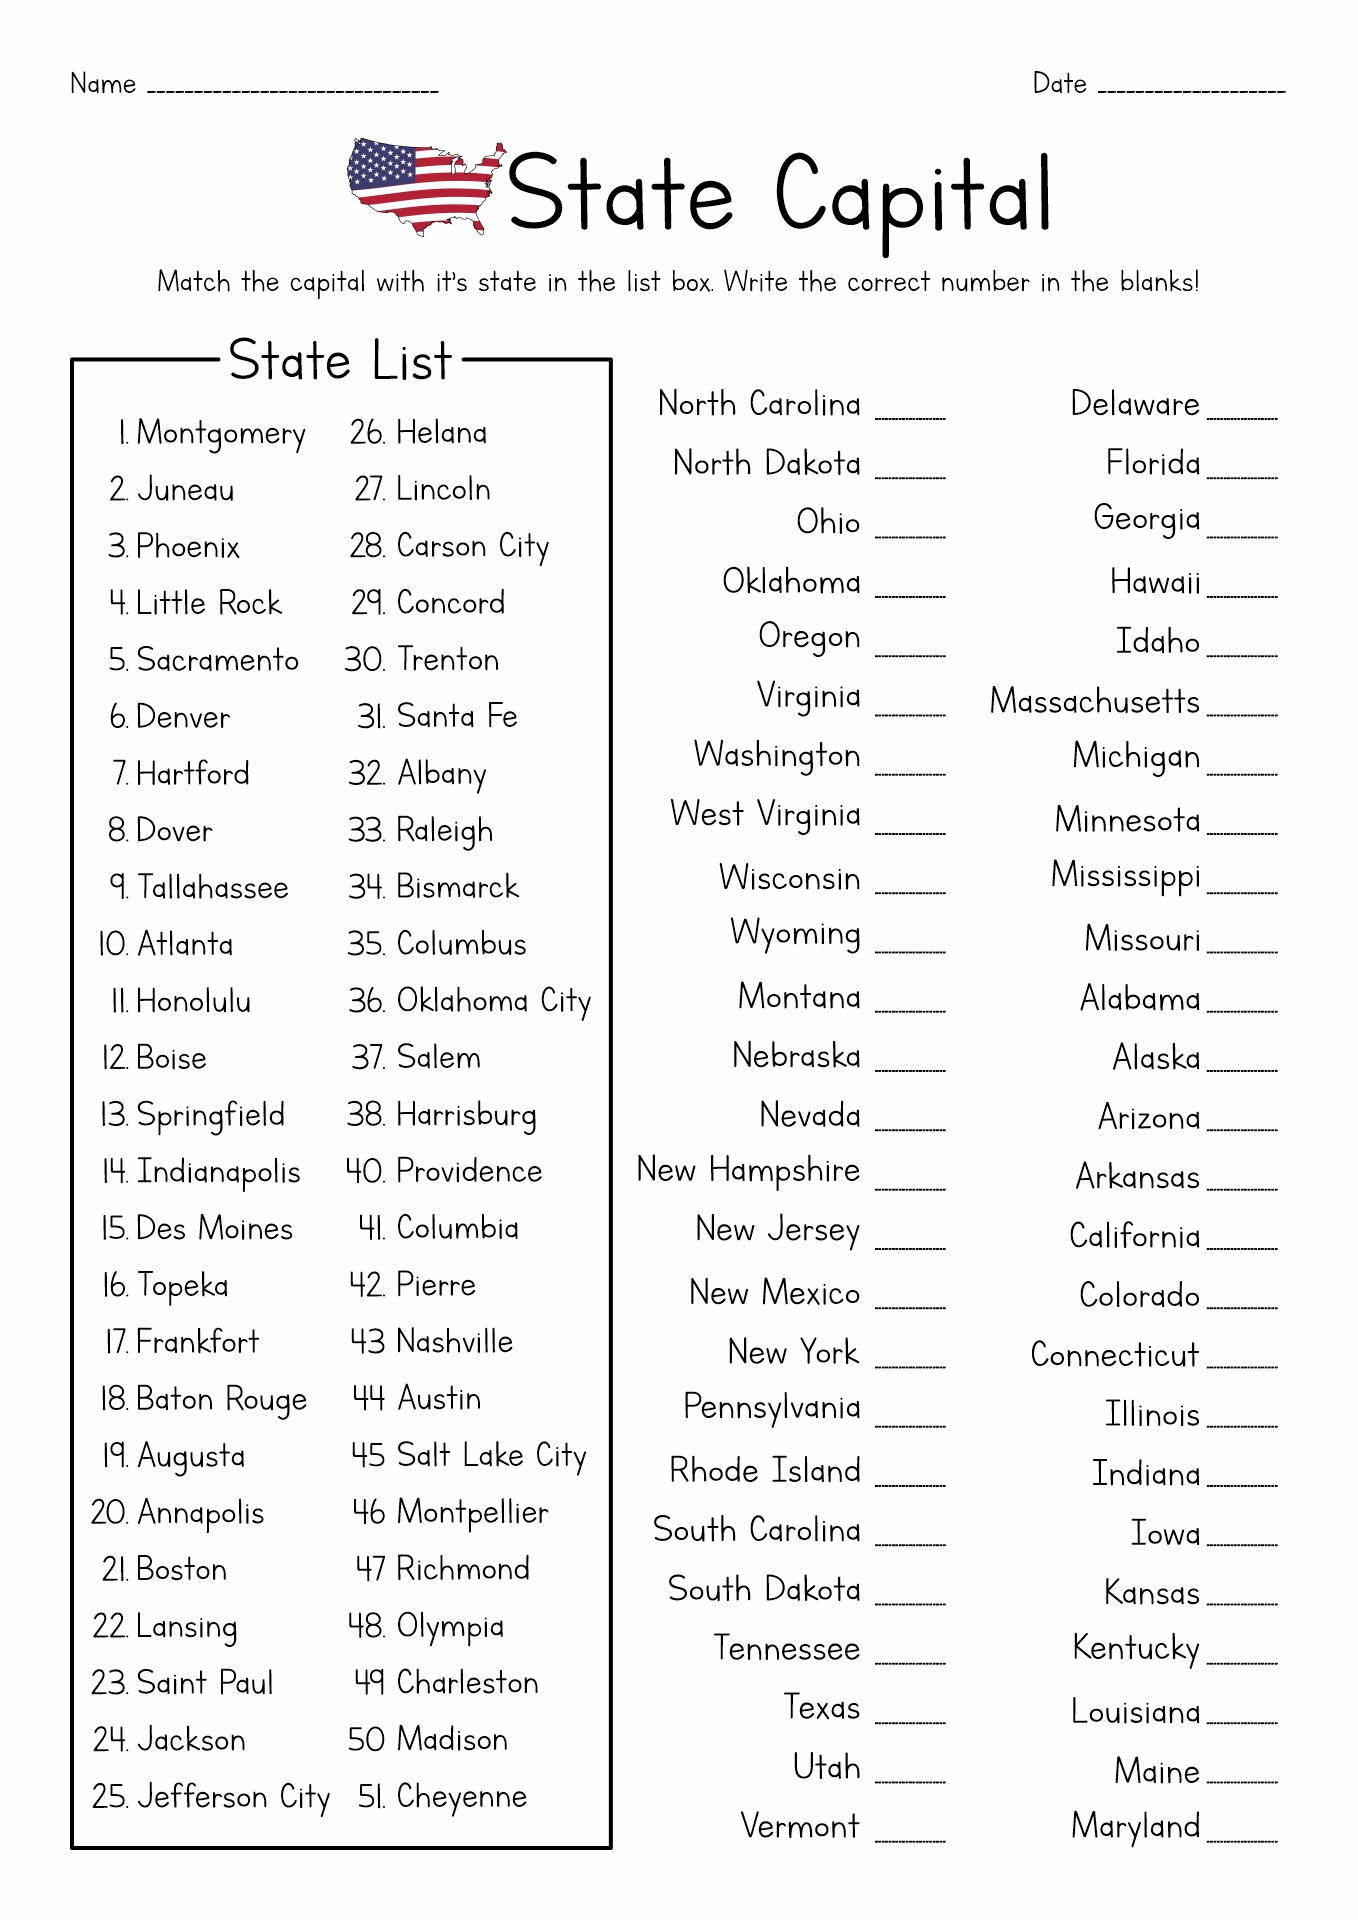 states-and-capitals-view-free-printable-geography-worksheet-for-rd